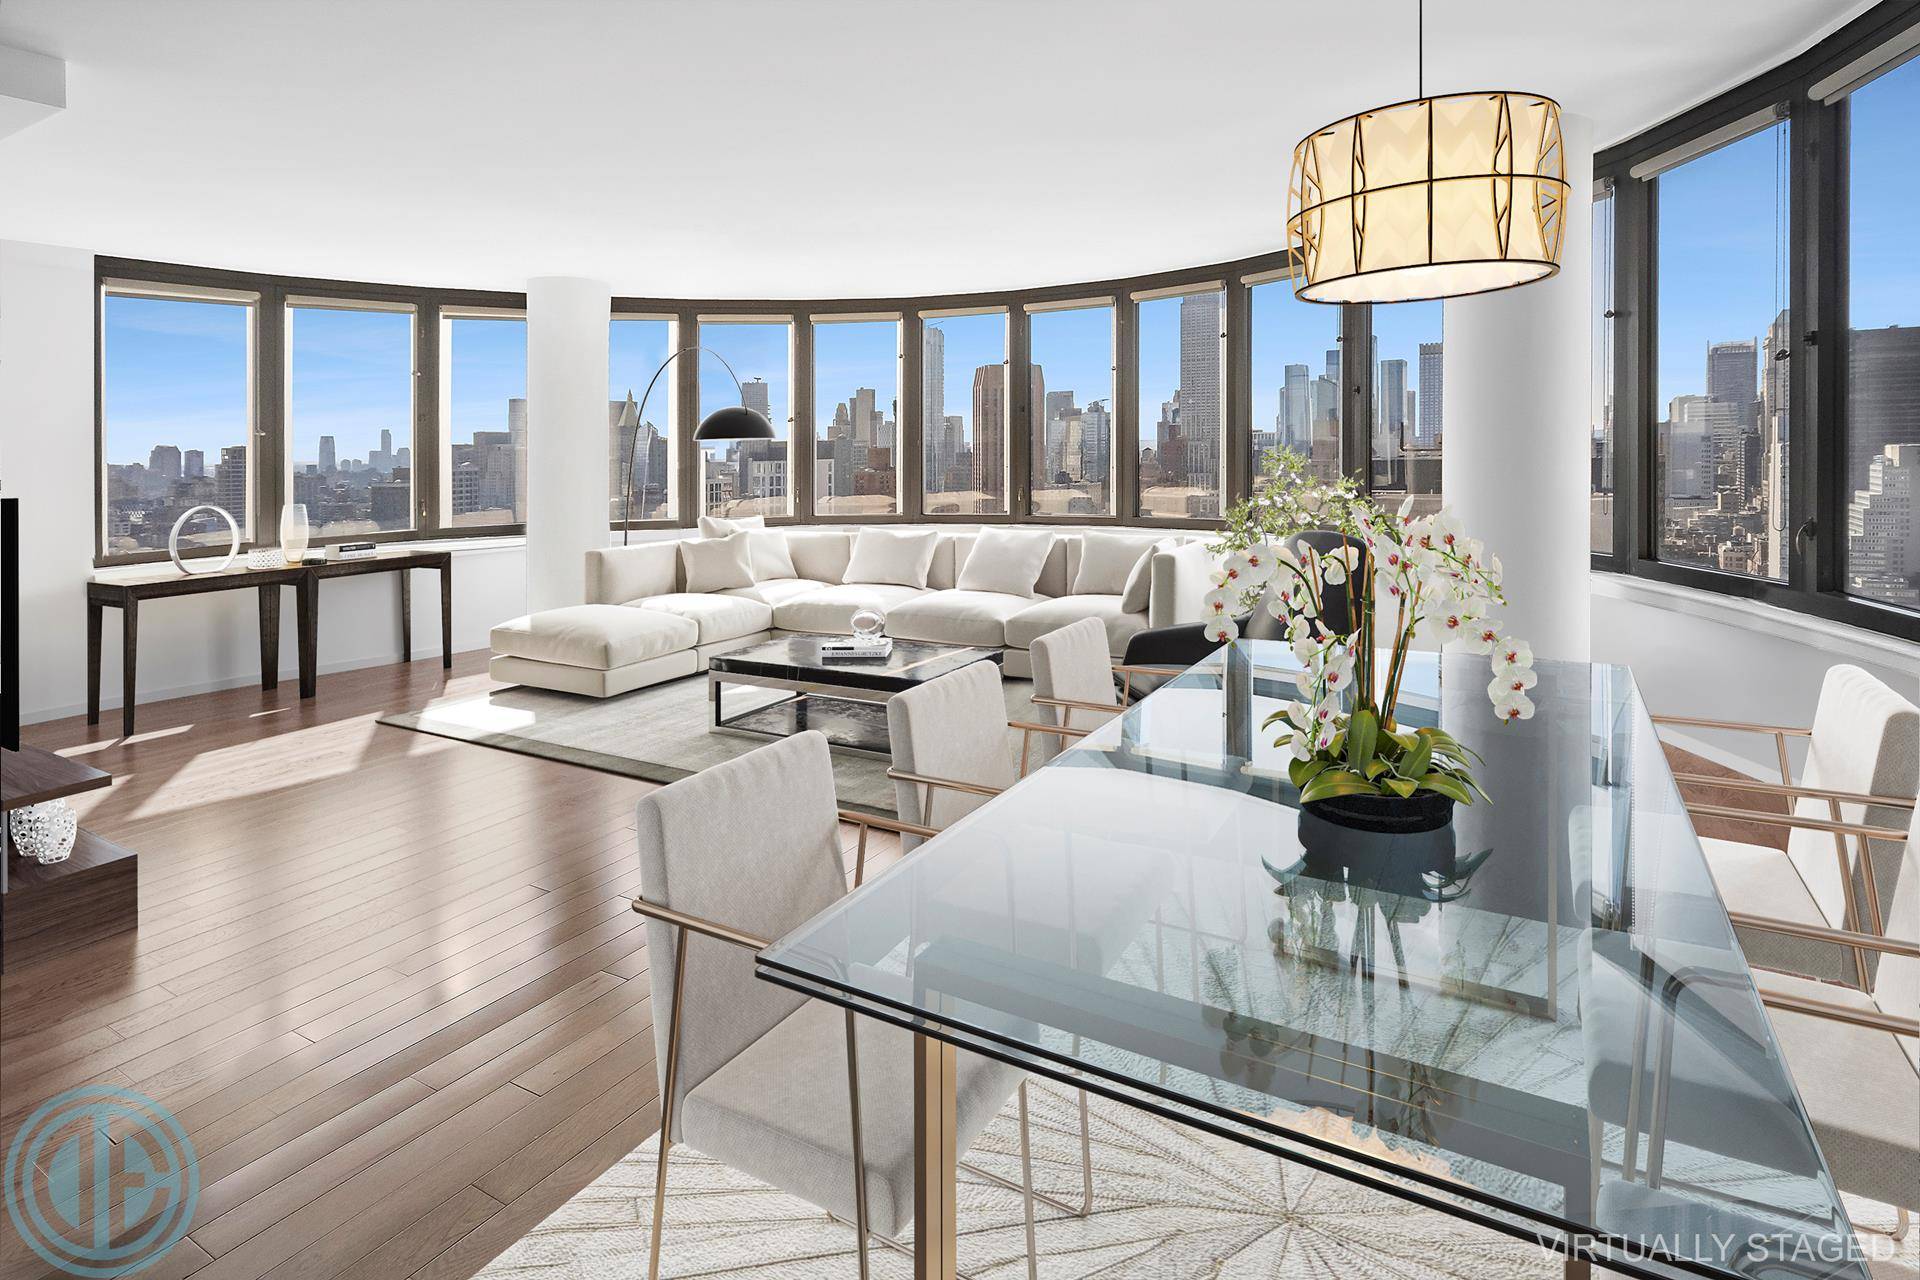 THE CORINTHIAN CONDOS 46th Floor Spectacular the best plus one renovated two bedroom two bathroom condo with Panoramic views from every room of South Manhattan sky line Empire State Building, ...